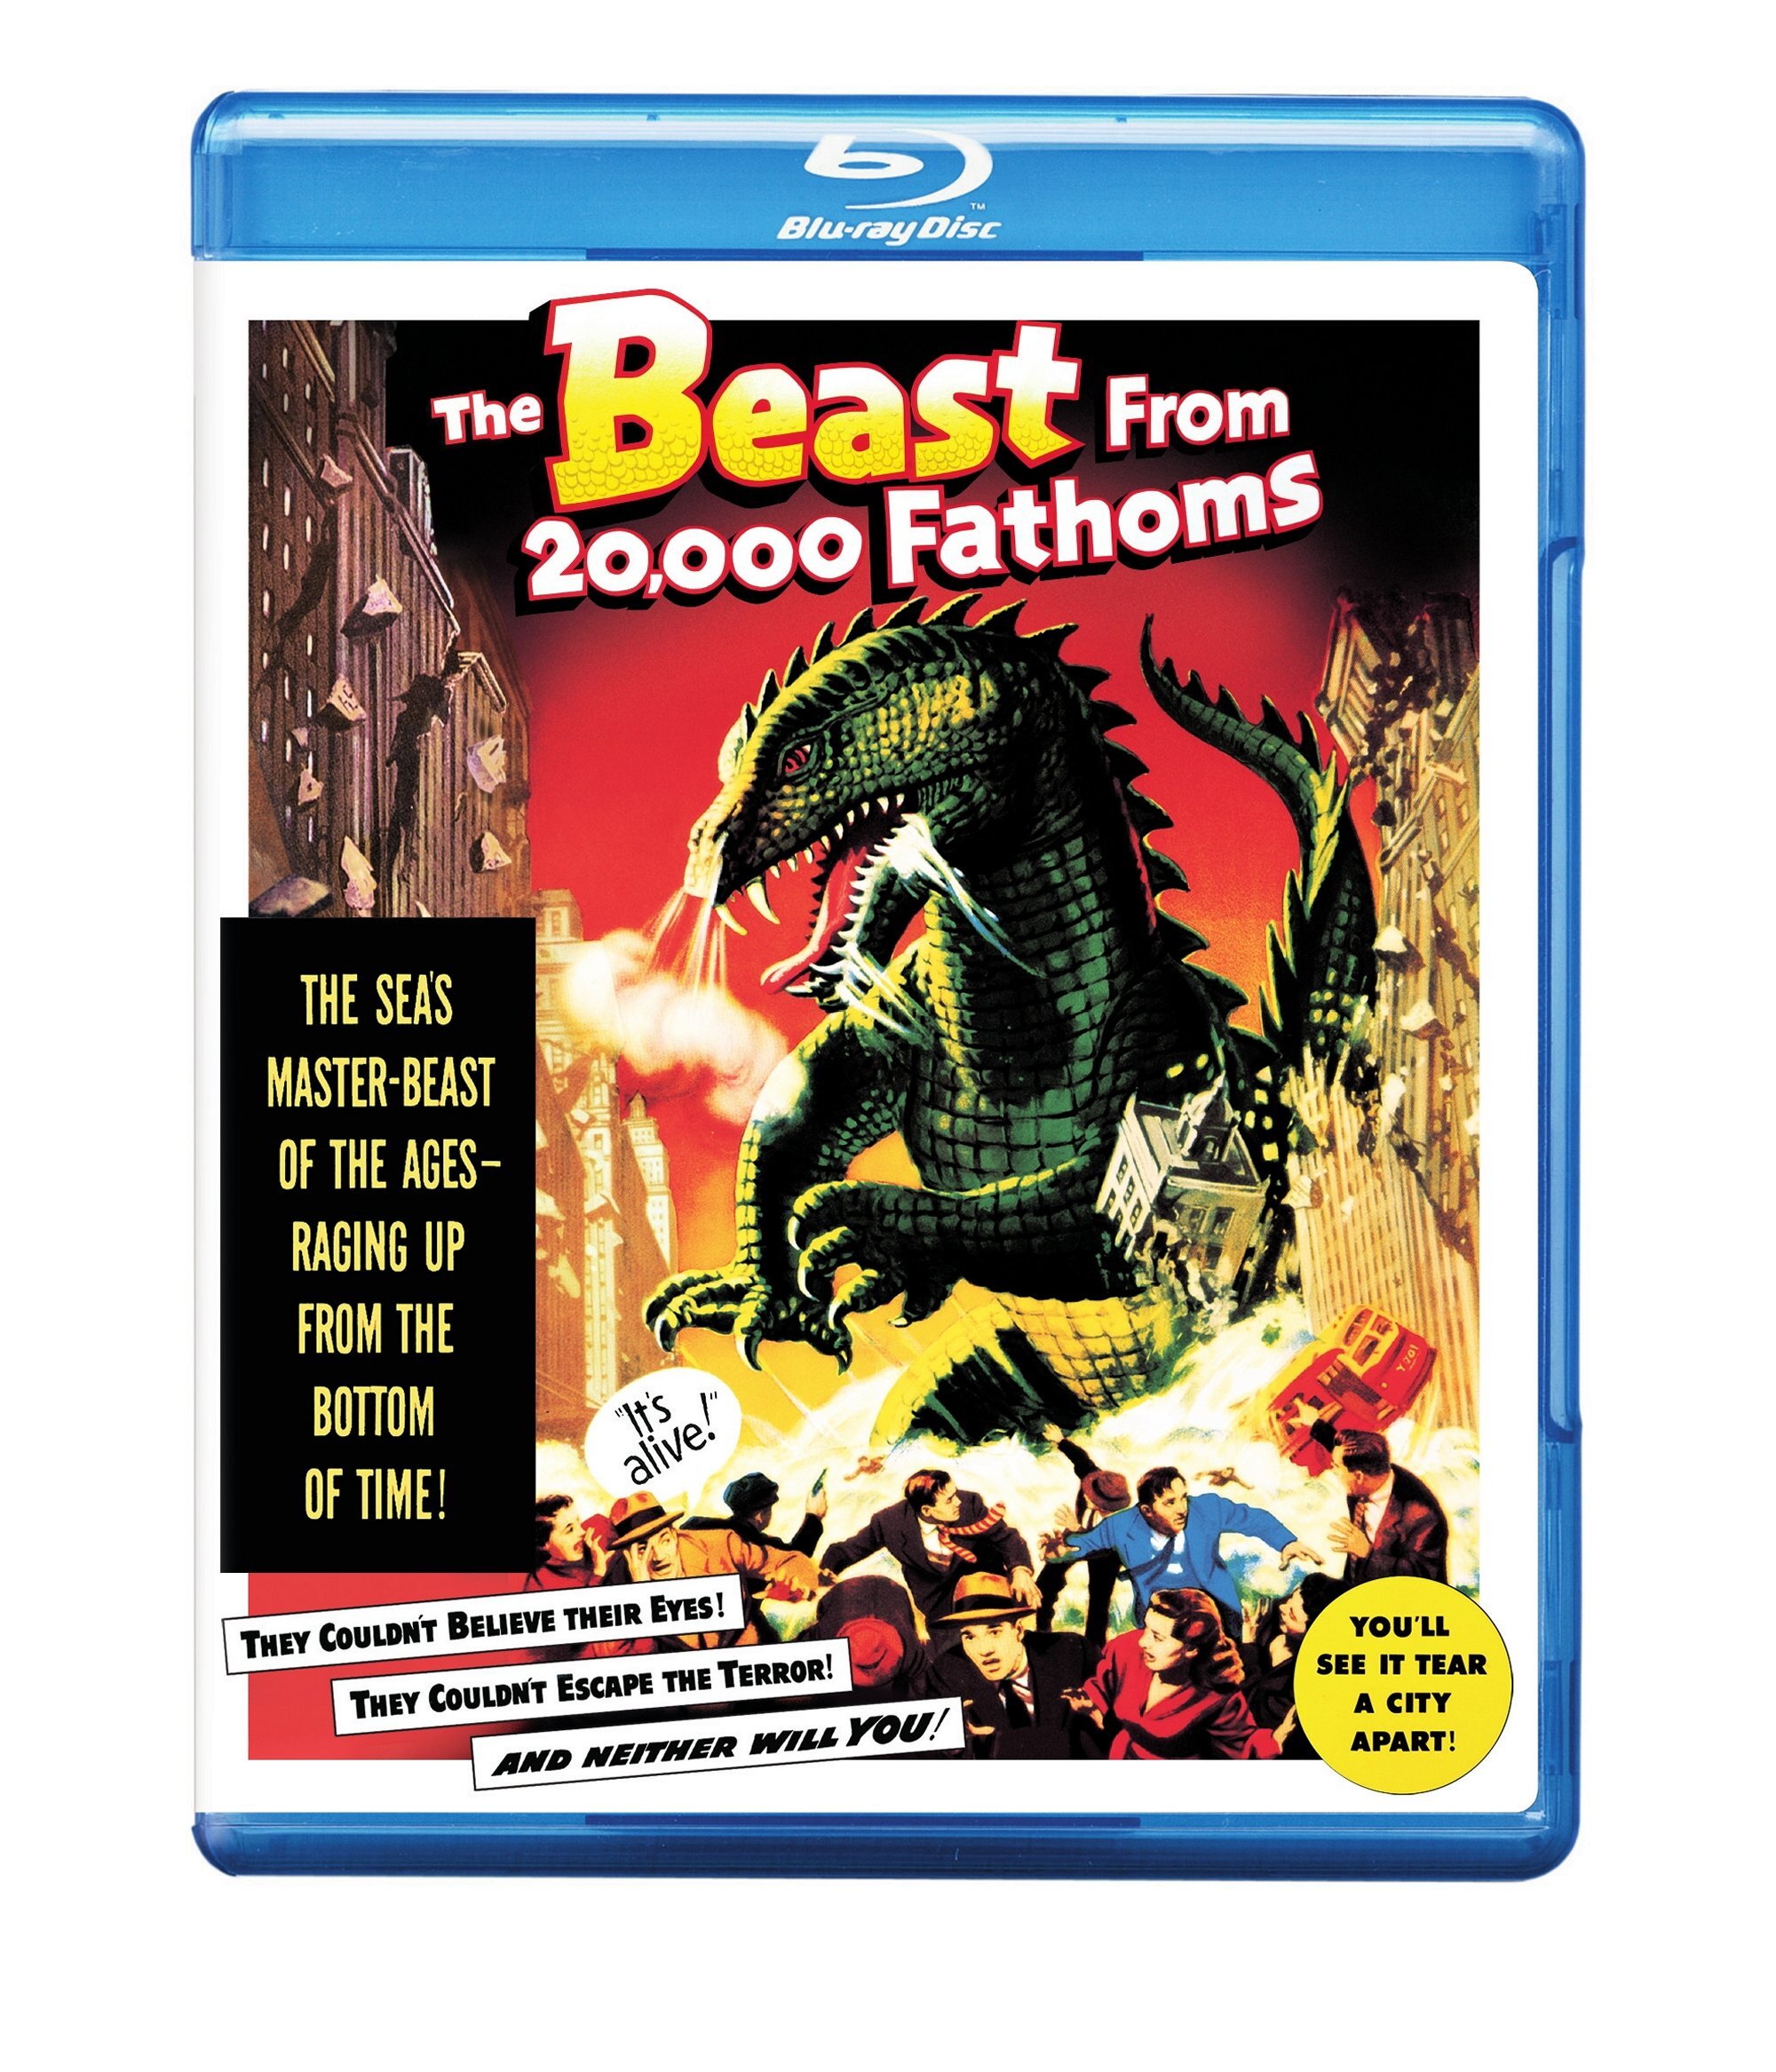 The Beast From 20,000 Fathoms - Blu-ray [ 1953 ]  - Sci Fi Movies On Blu-ray - Movies On GRUV